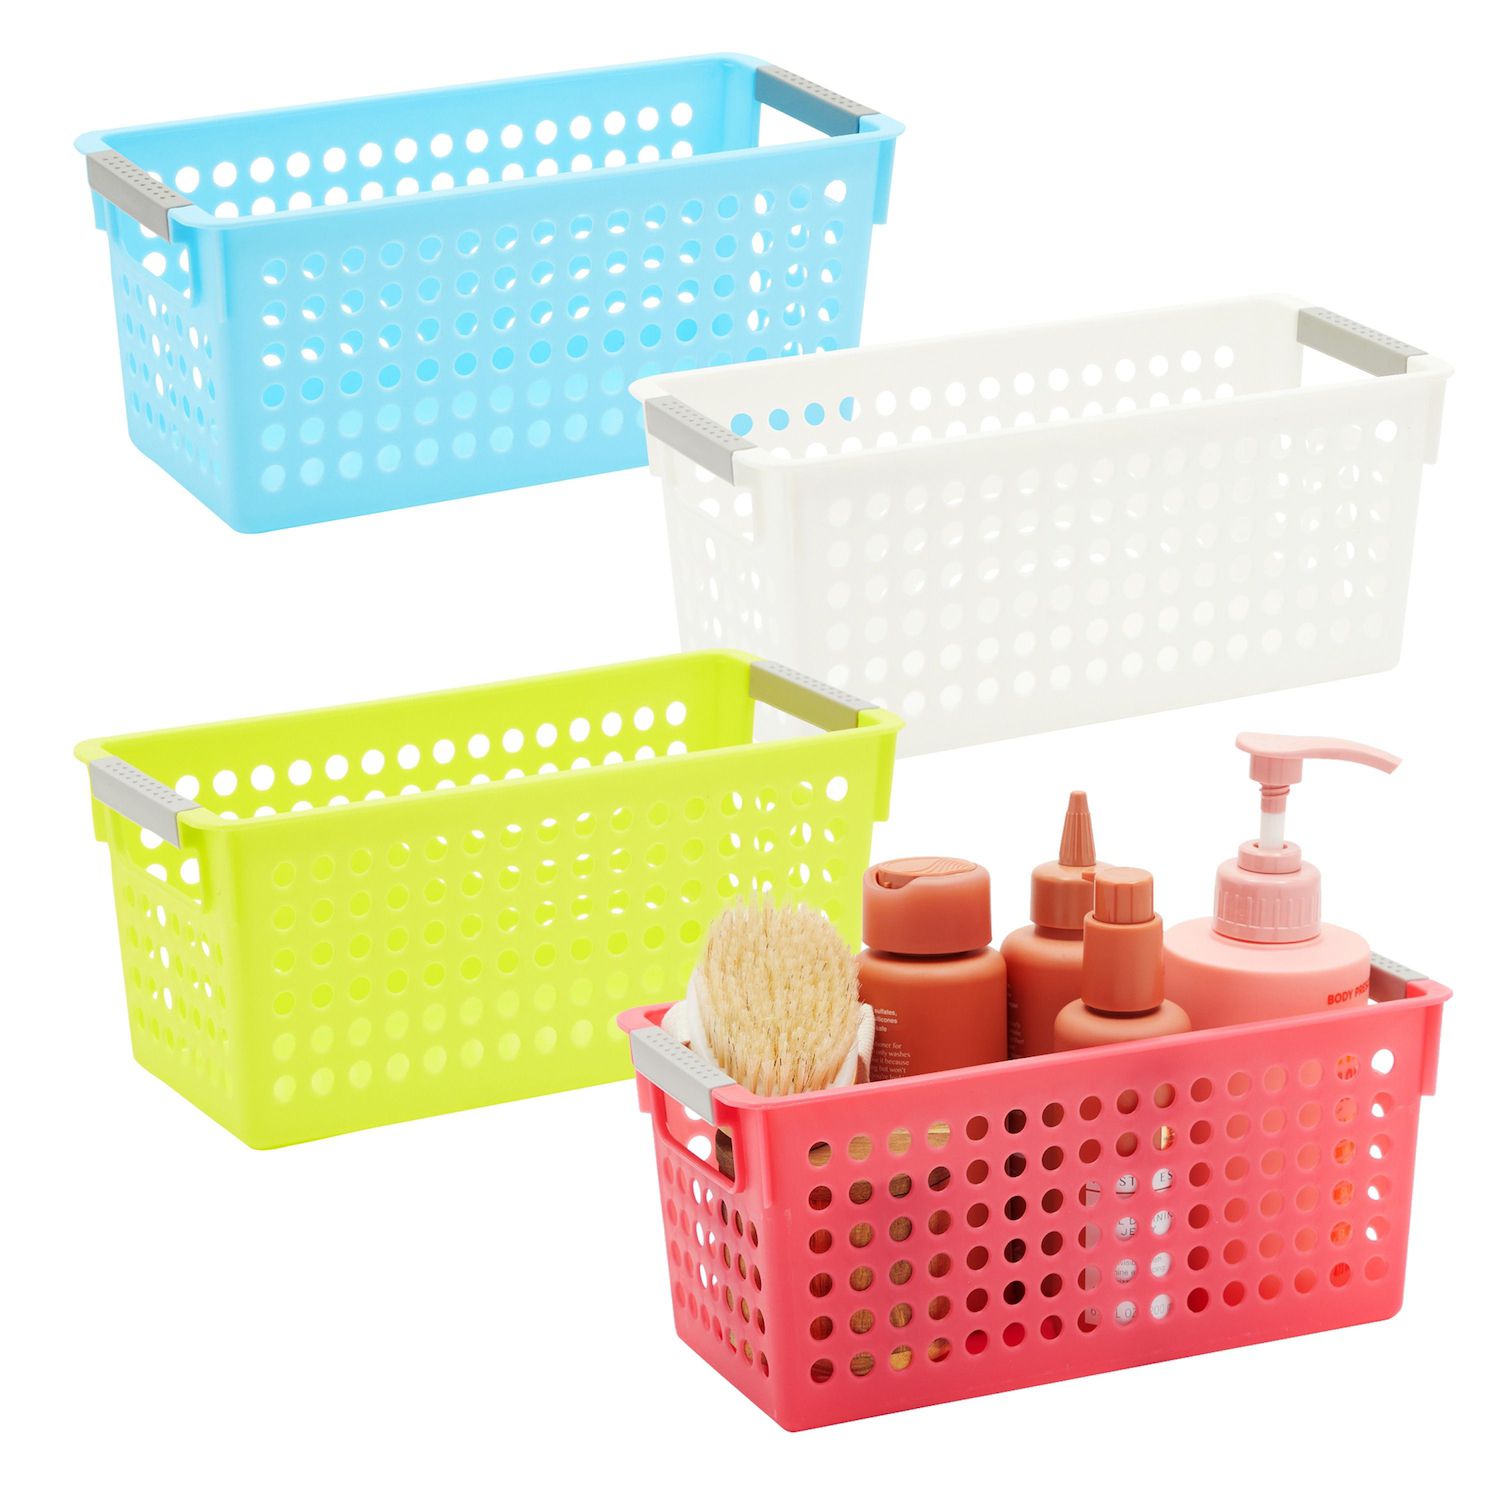 6 Pack Plastic Turn In Paper Trays for Classroom, Colorful Storage Bin  Basket Organizers for School Supplies, 6 Colors (10 x 13.5 In)